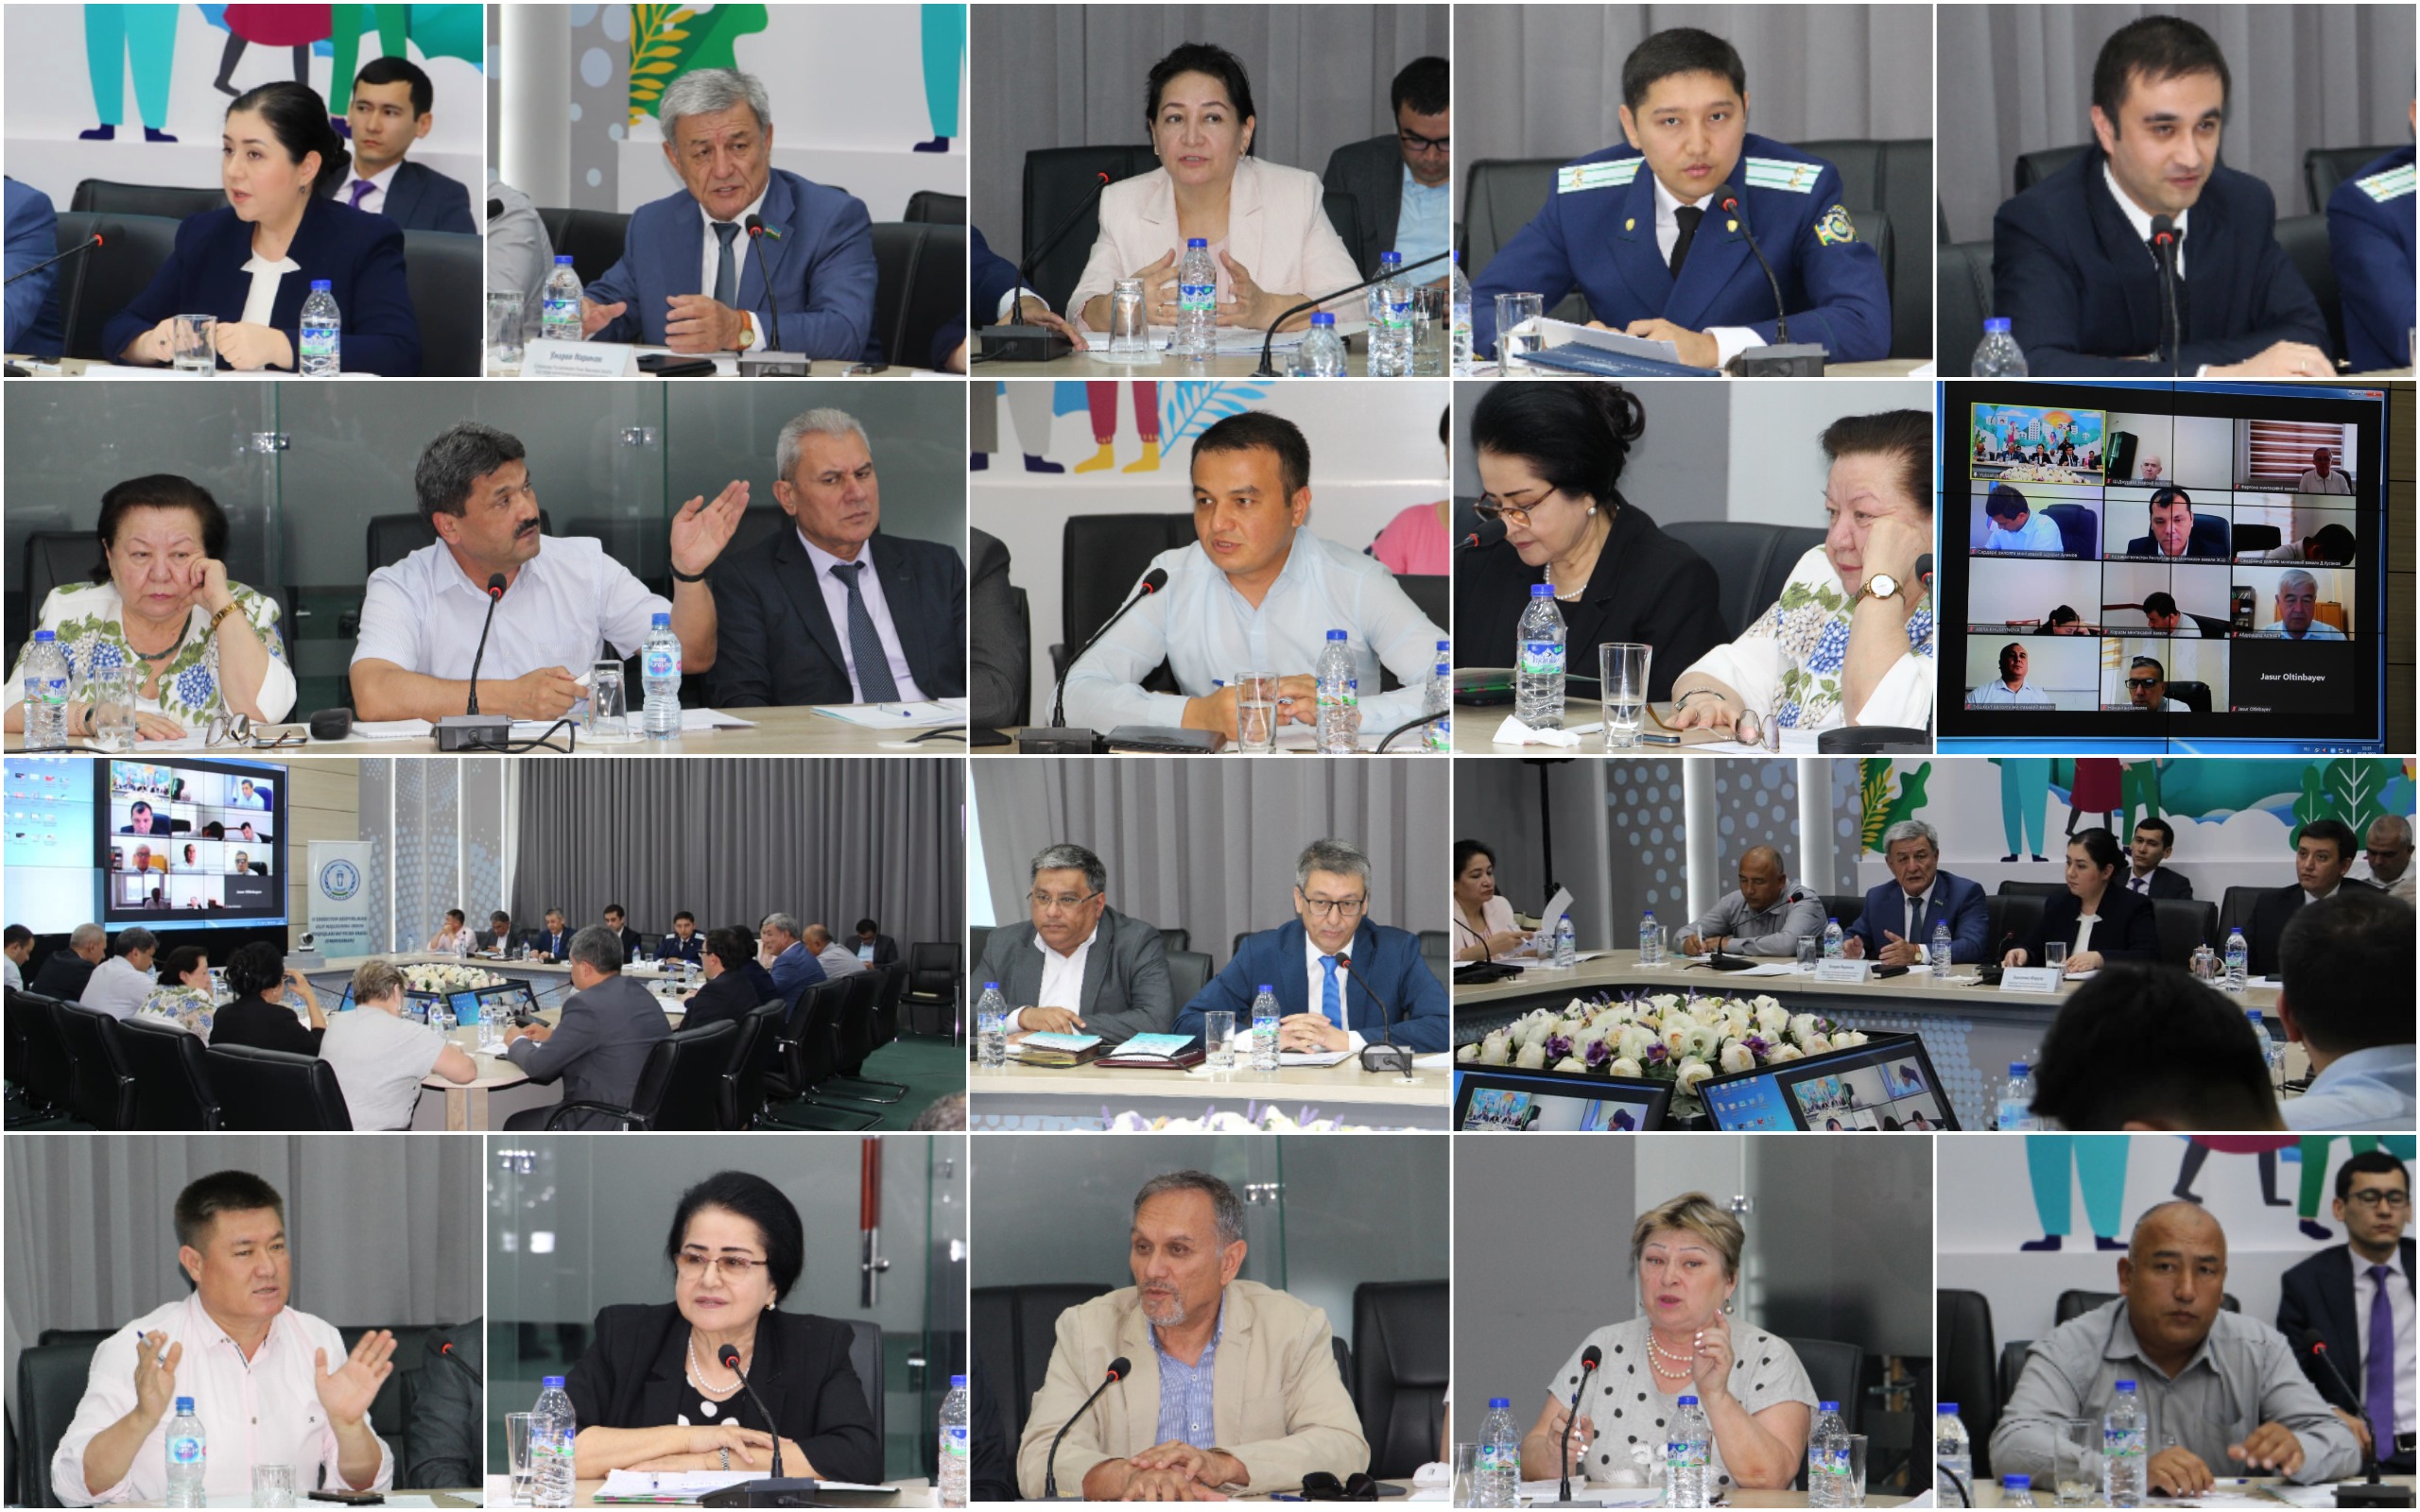 An open dialogue was held between government bodies and representatives of civil society in the field of ensuring human rights